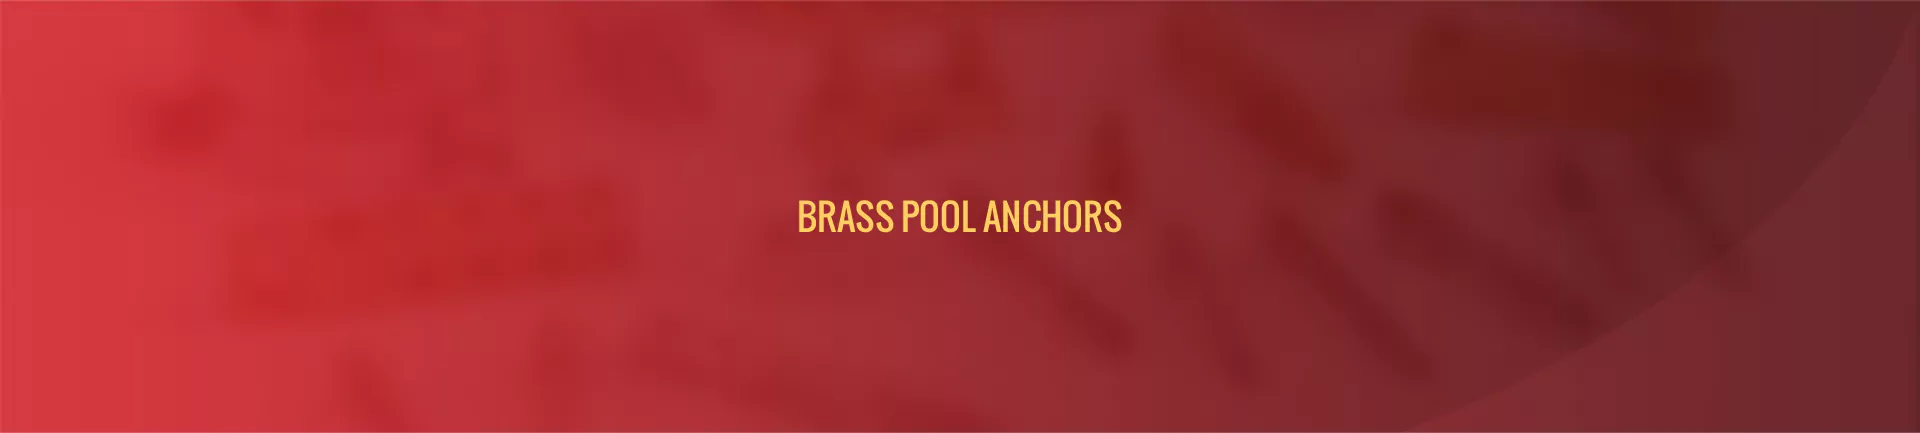 brass-pool-anchors-banner